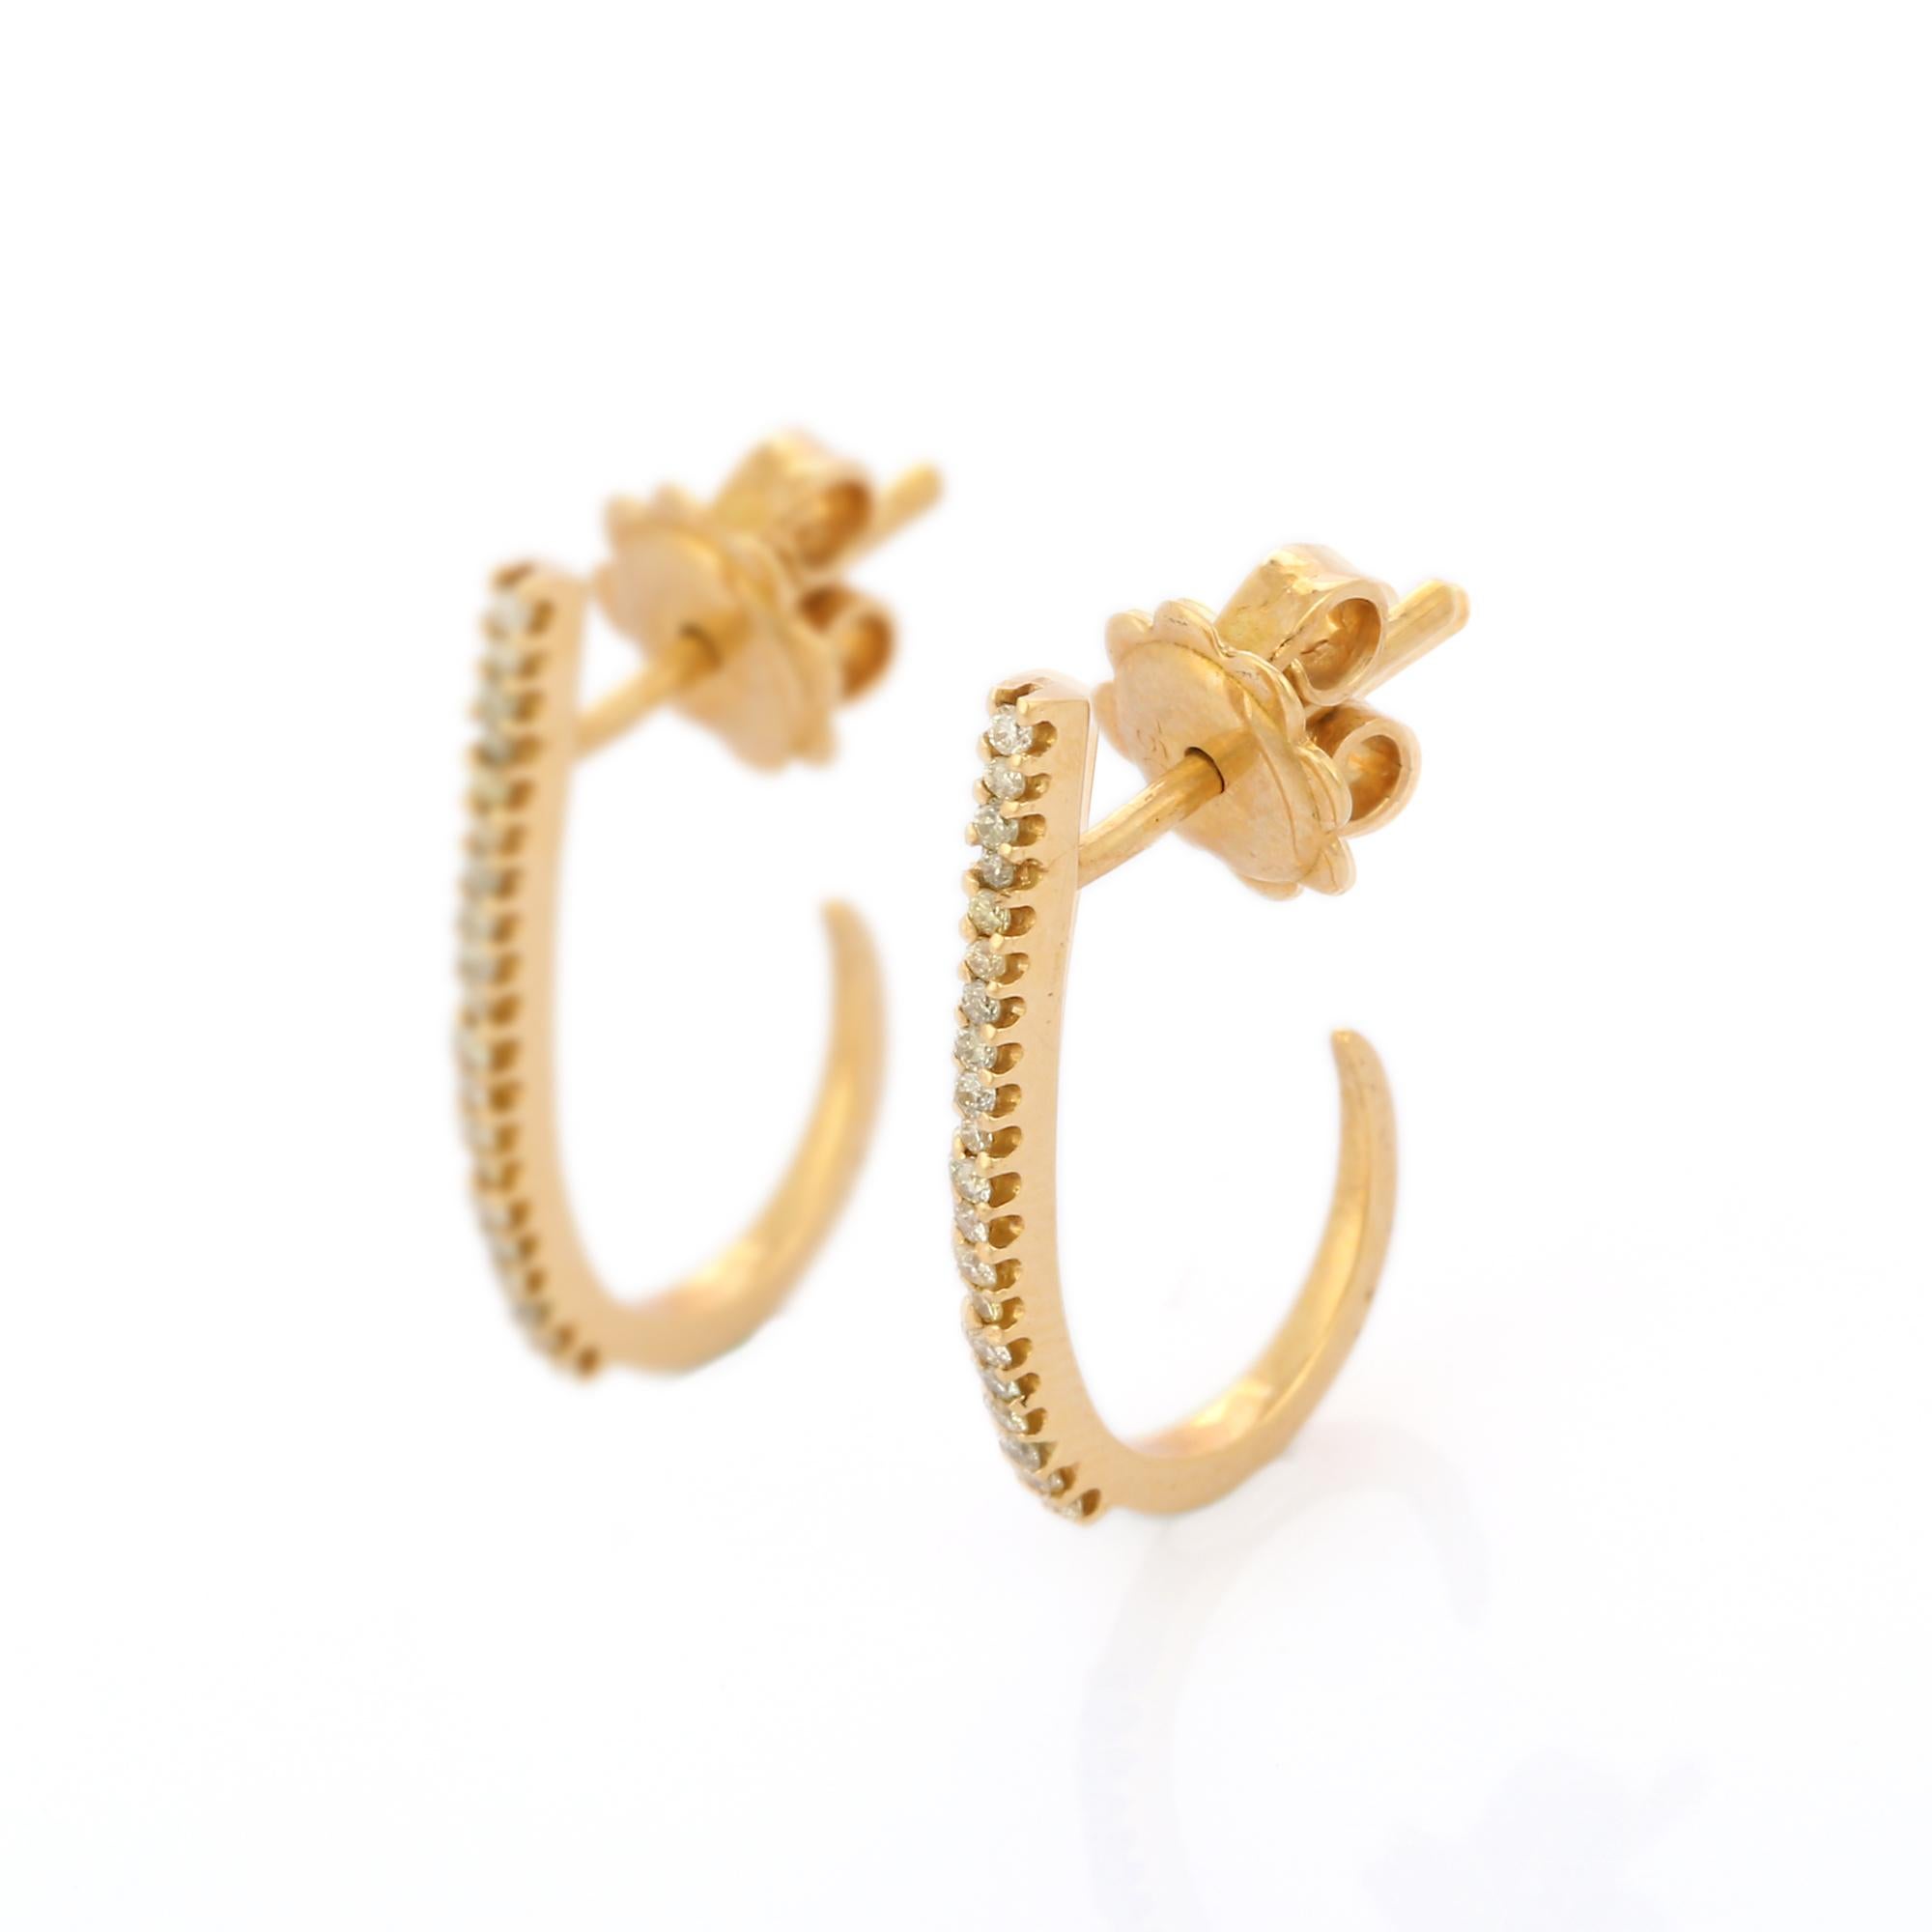 Certified Diamond Open Hoop Earrings for Her in 18K Gold to make a statement with your look. You shall need hoop earrings to make a statement with your look. These earrings create a sparkling, luxurious look featuring round cut diamond.
April